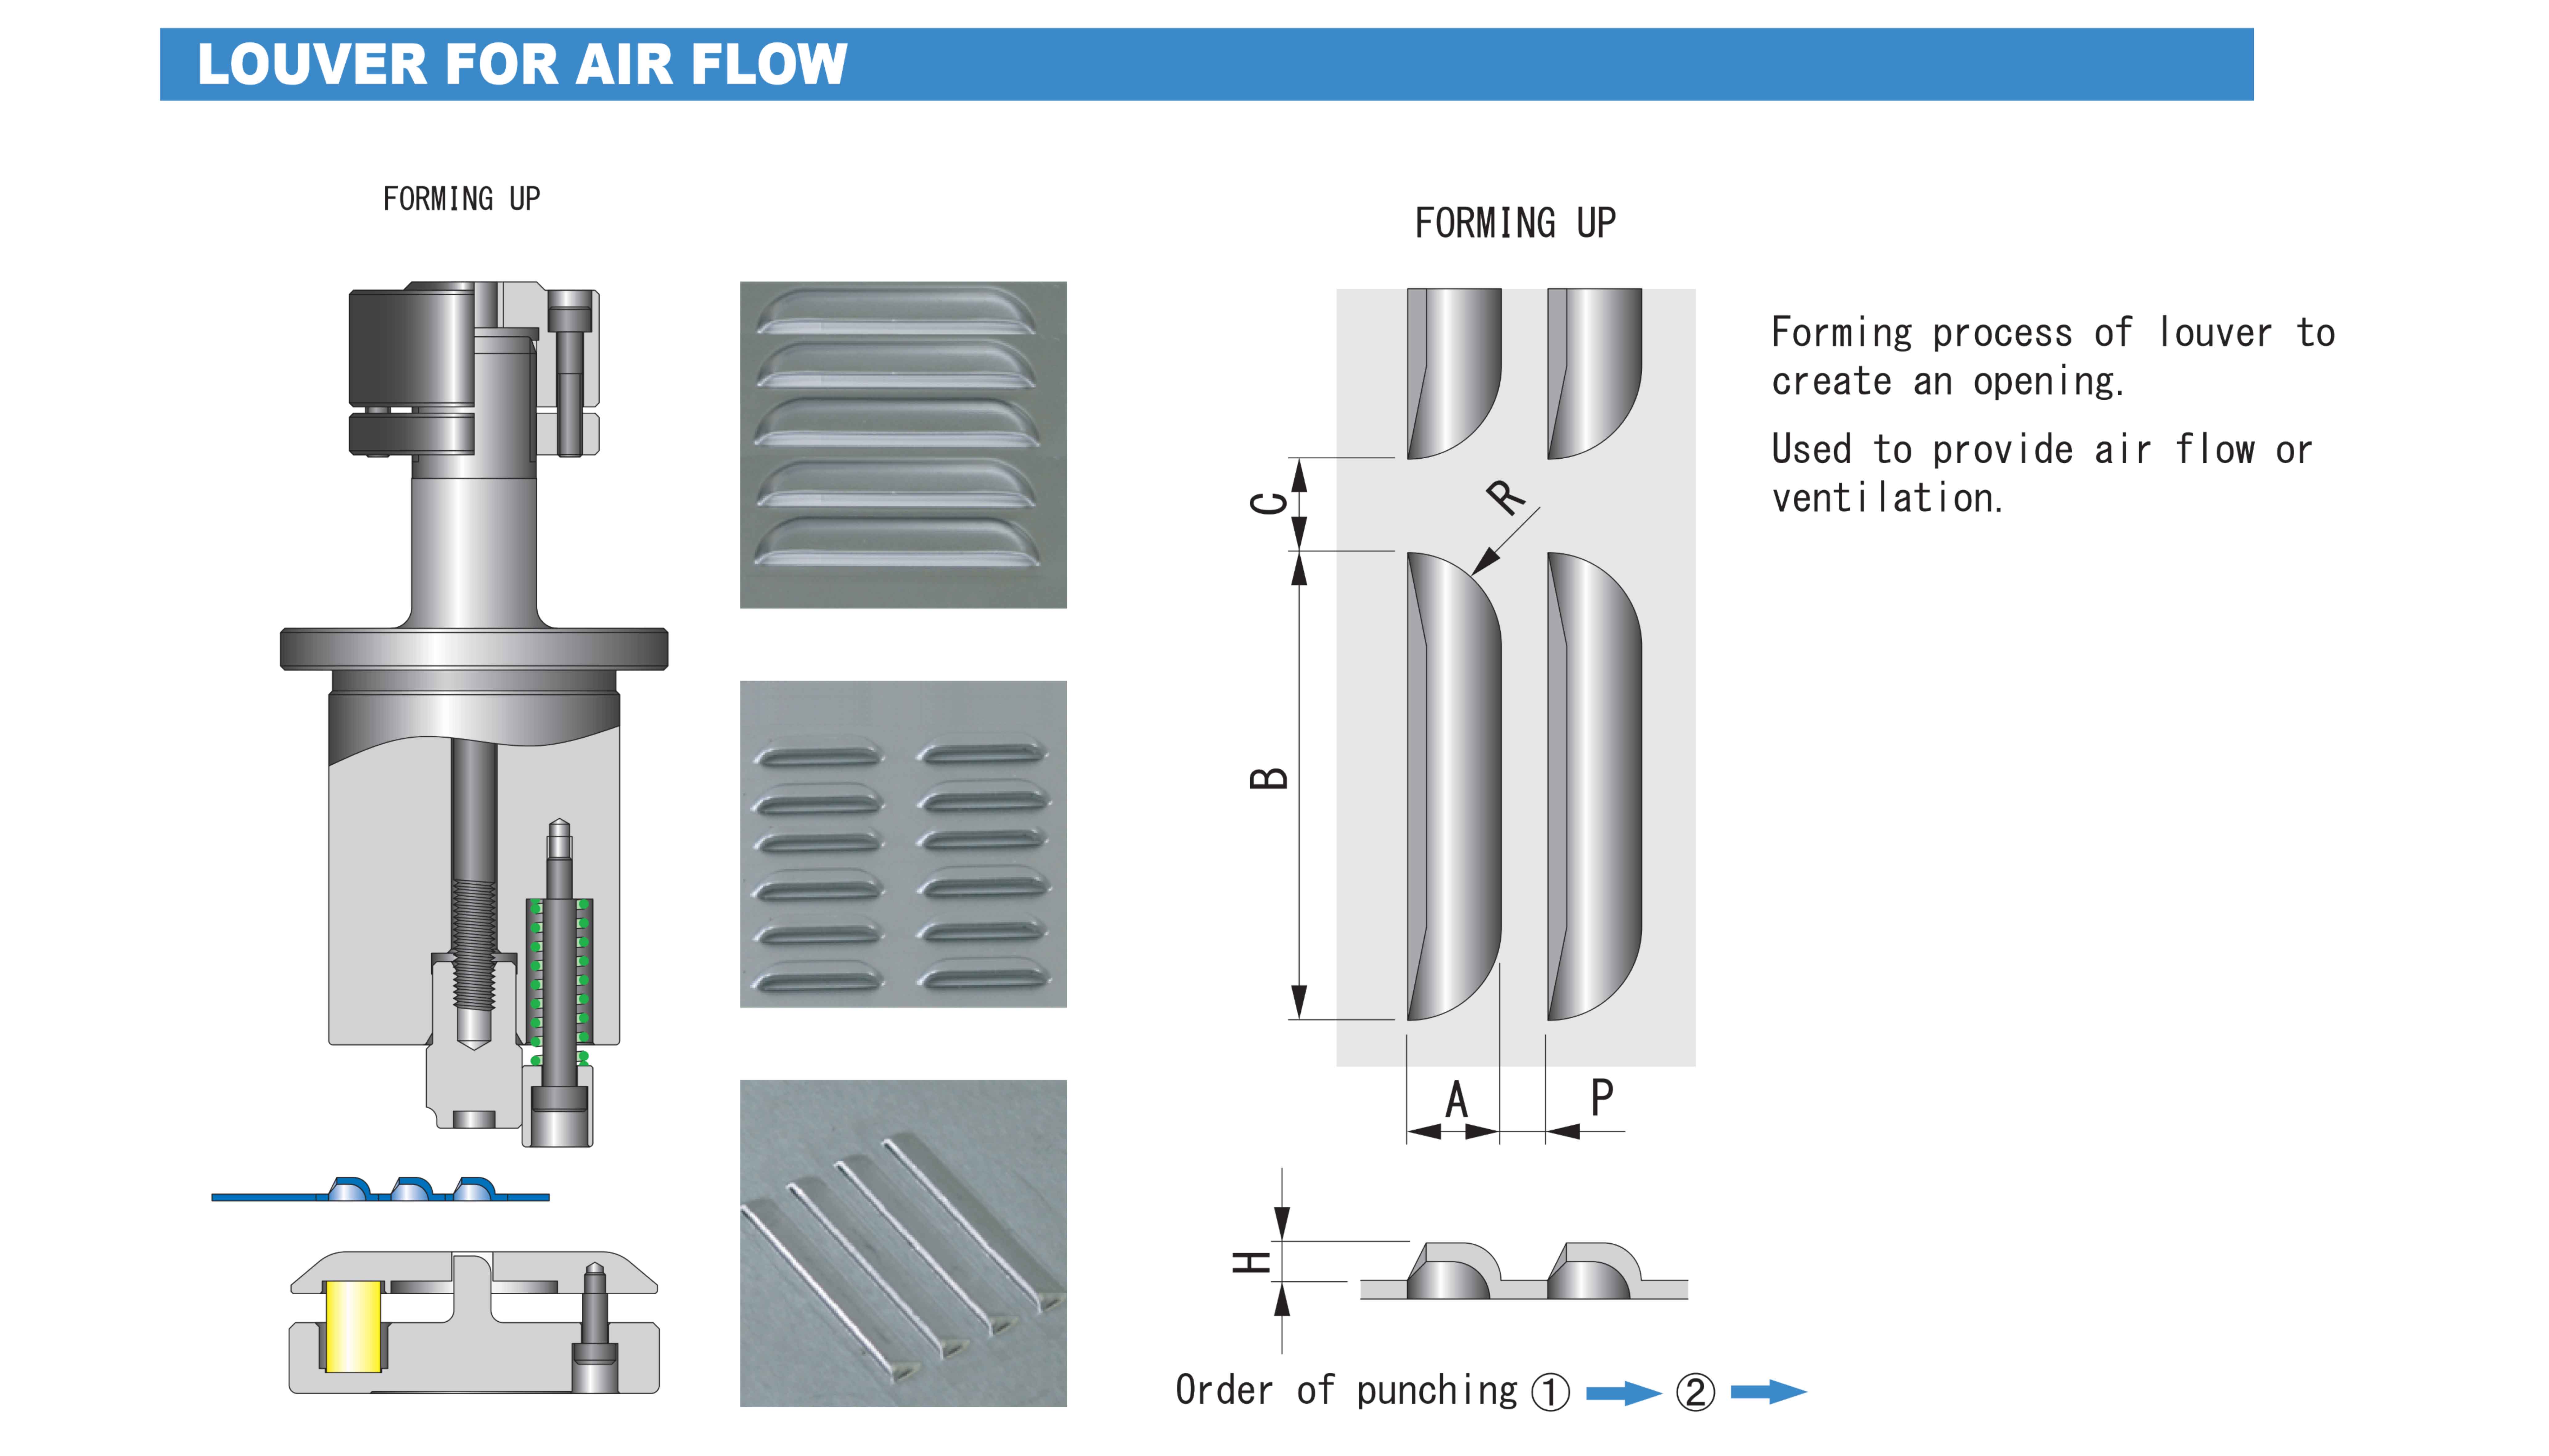 CONIC-FORMING-LOUVER-AIR-FLOW-AMADA